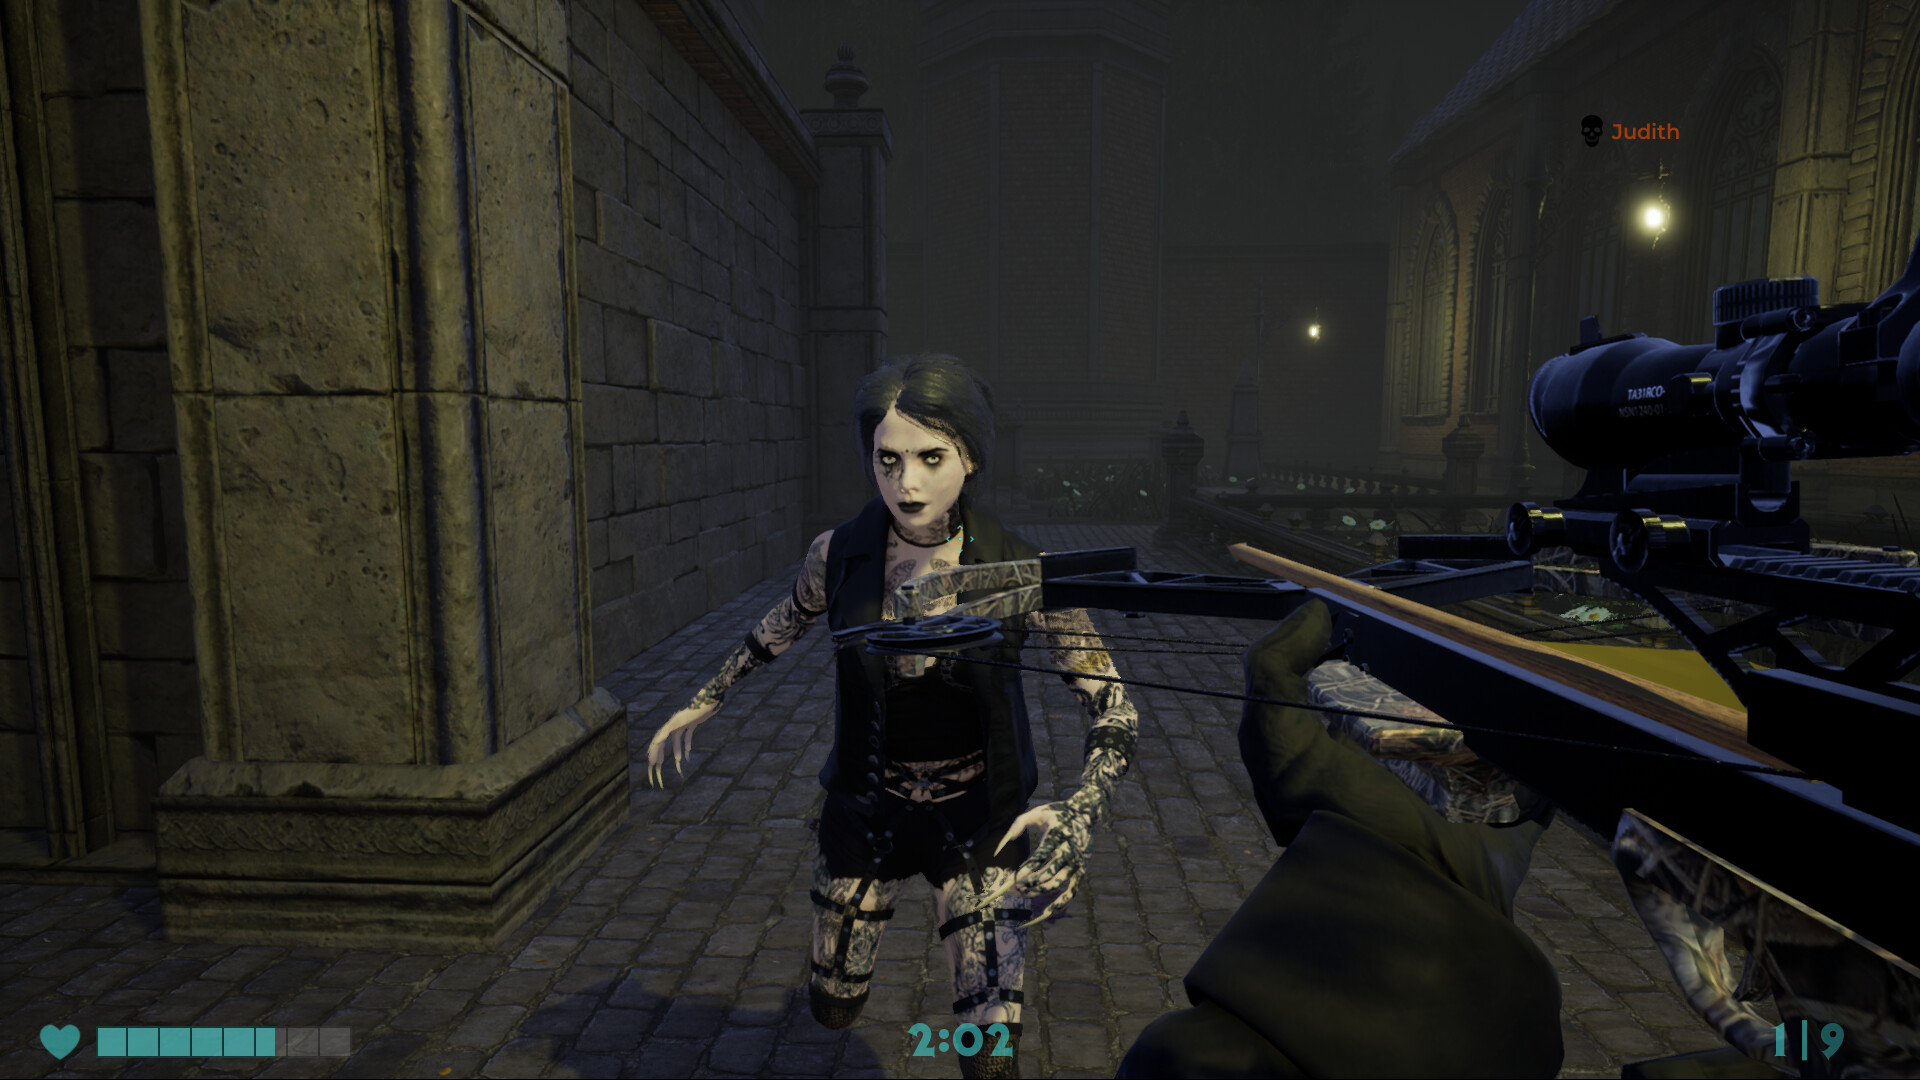 Vampire Slayer: The Resurrection Free Download for PC